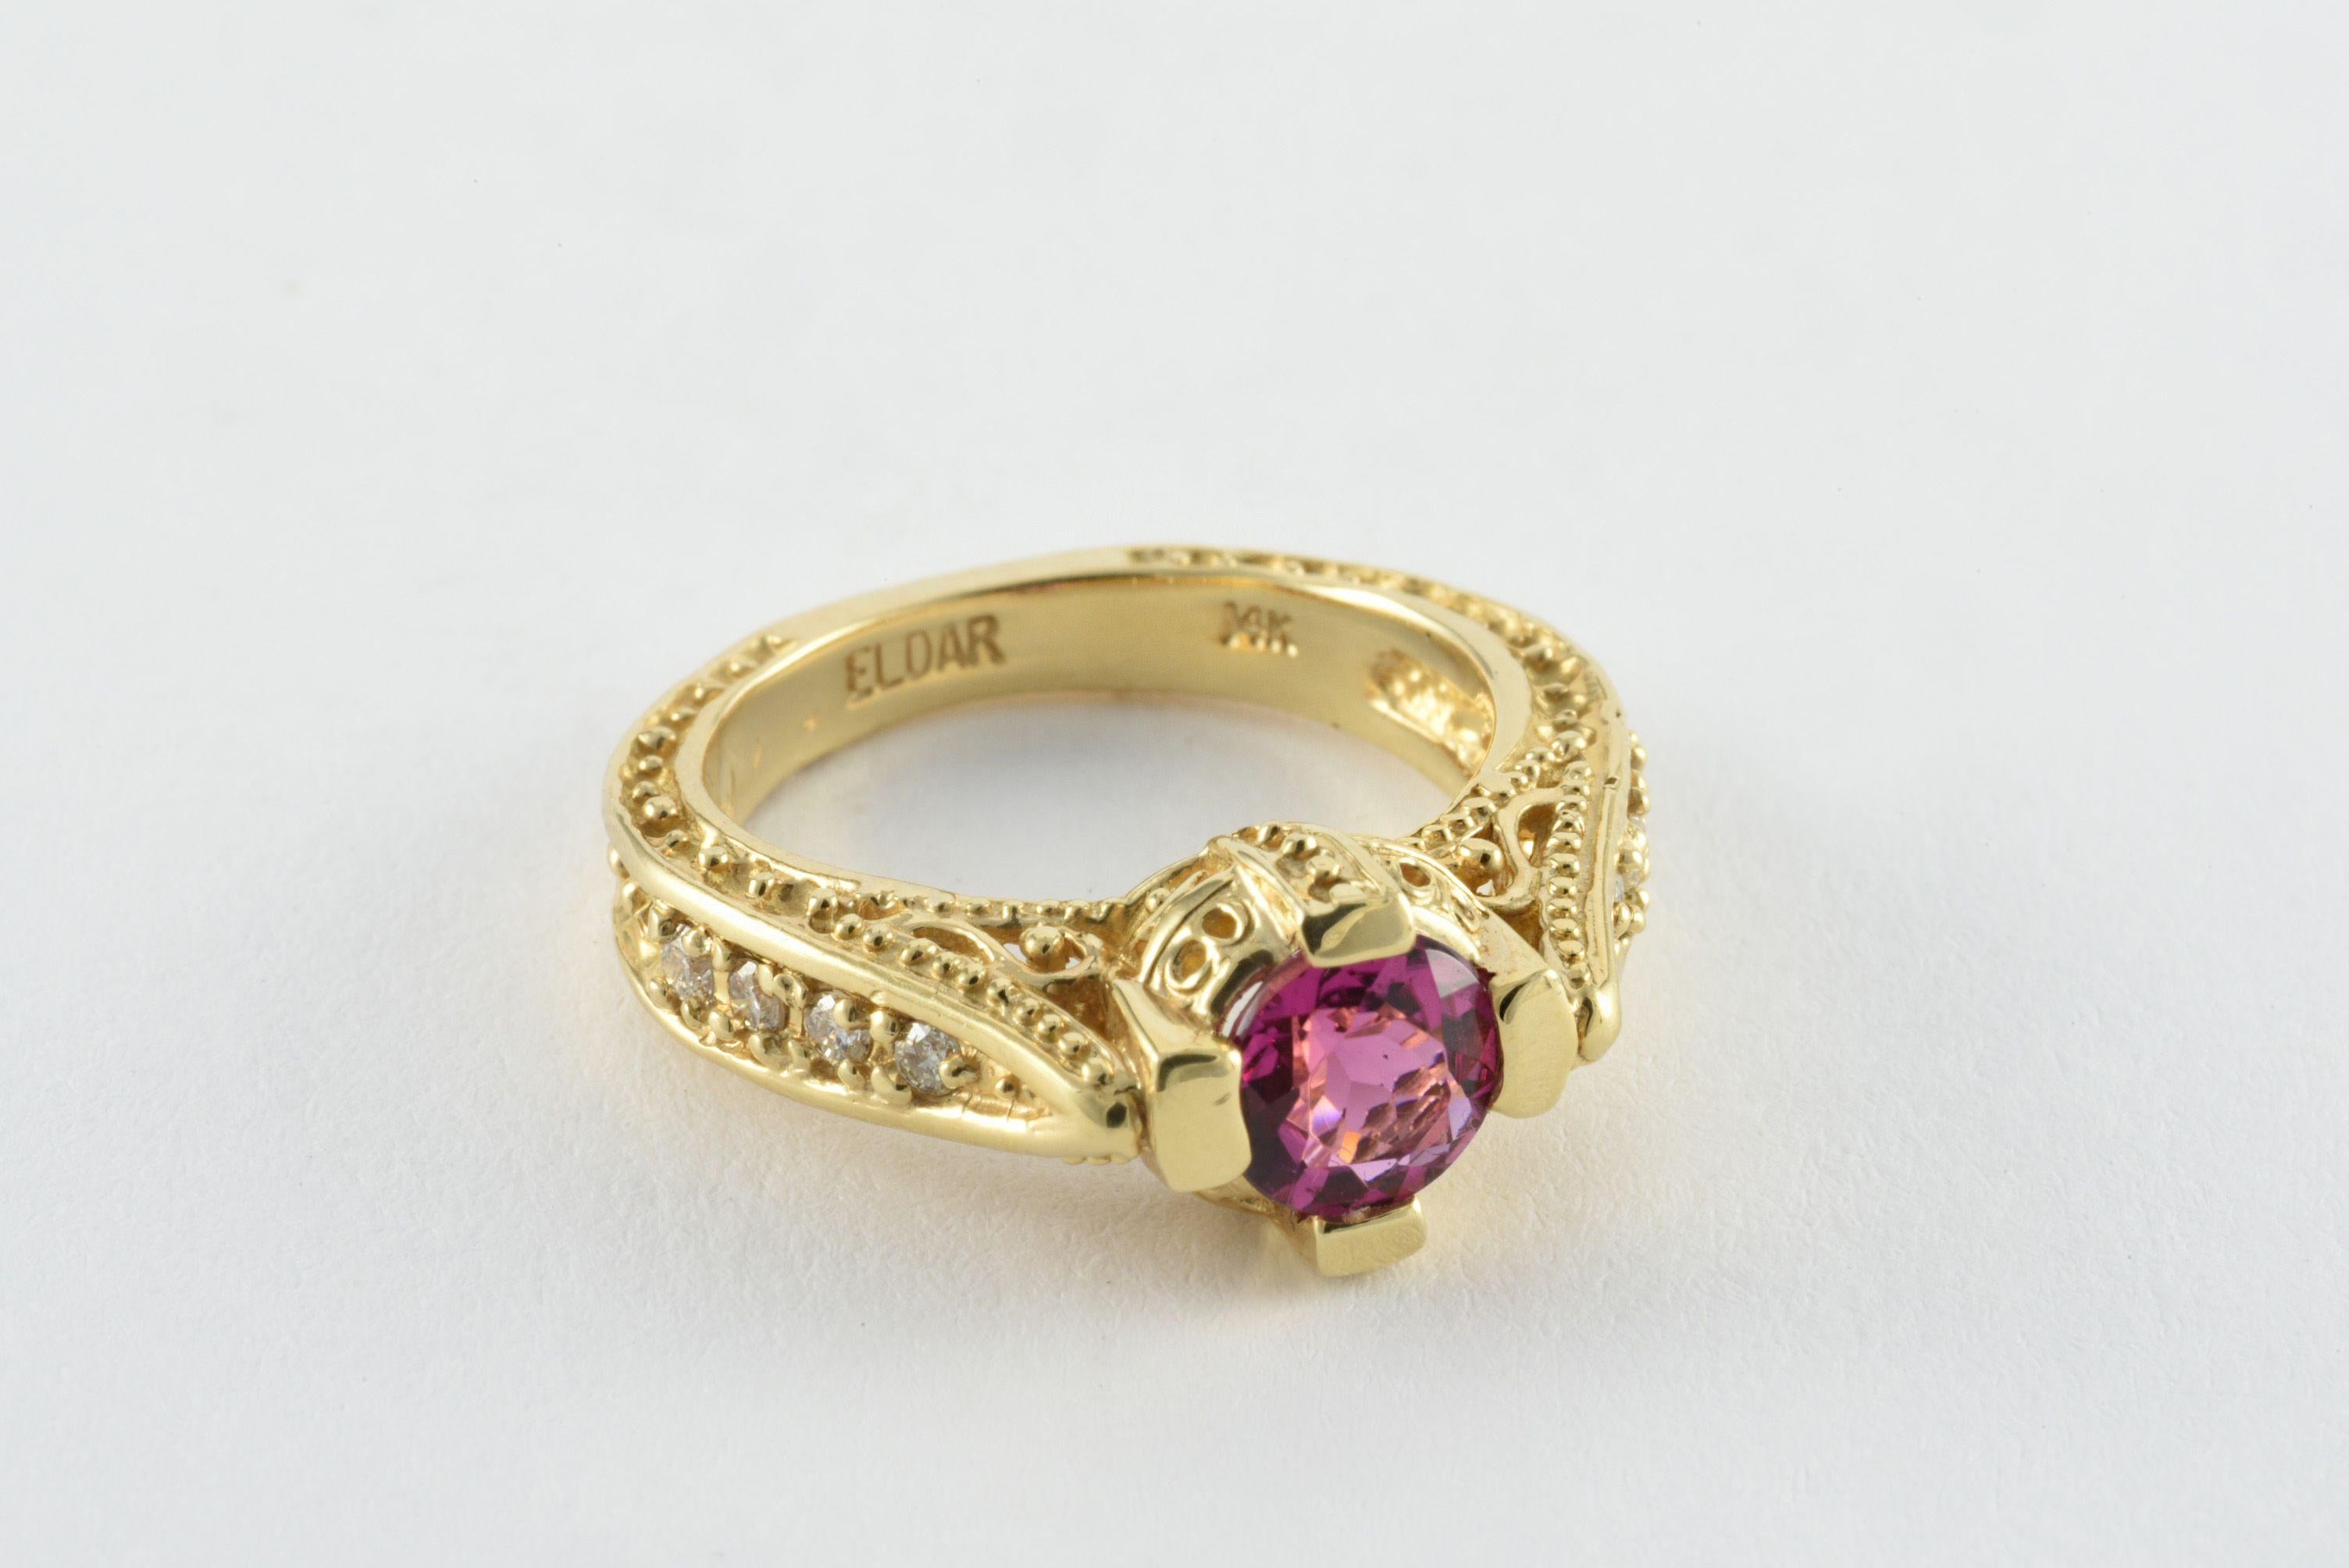 A natural pink round-shaped tourmaline measuring approximately 0.97 carats is the centerpiece of this ornate modern band fashioned from 14kt yellow gold with decorative swirling piercing, delicate milgraining and elaborate etching. The sides are